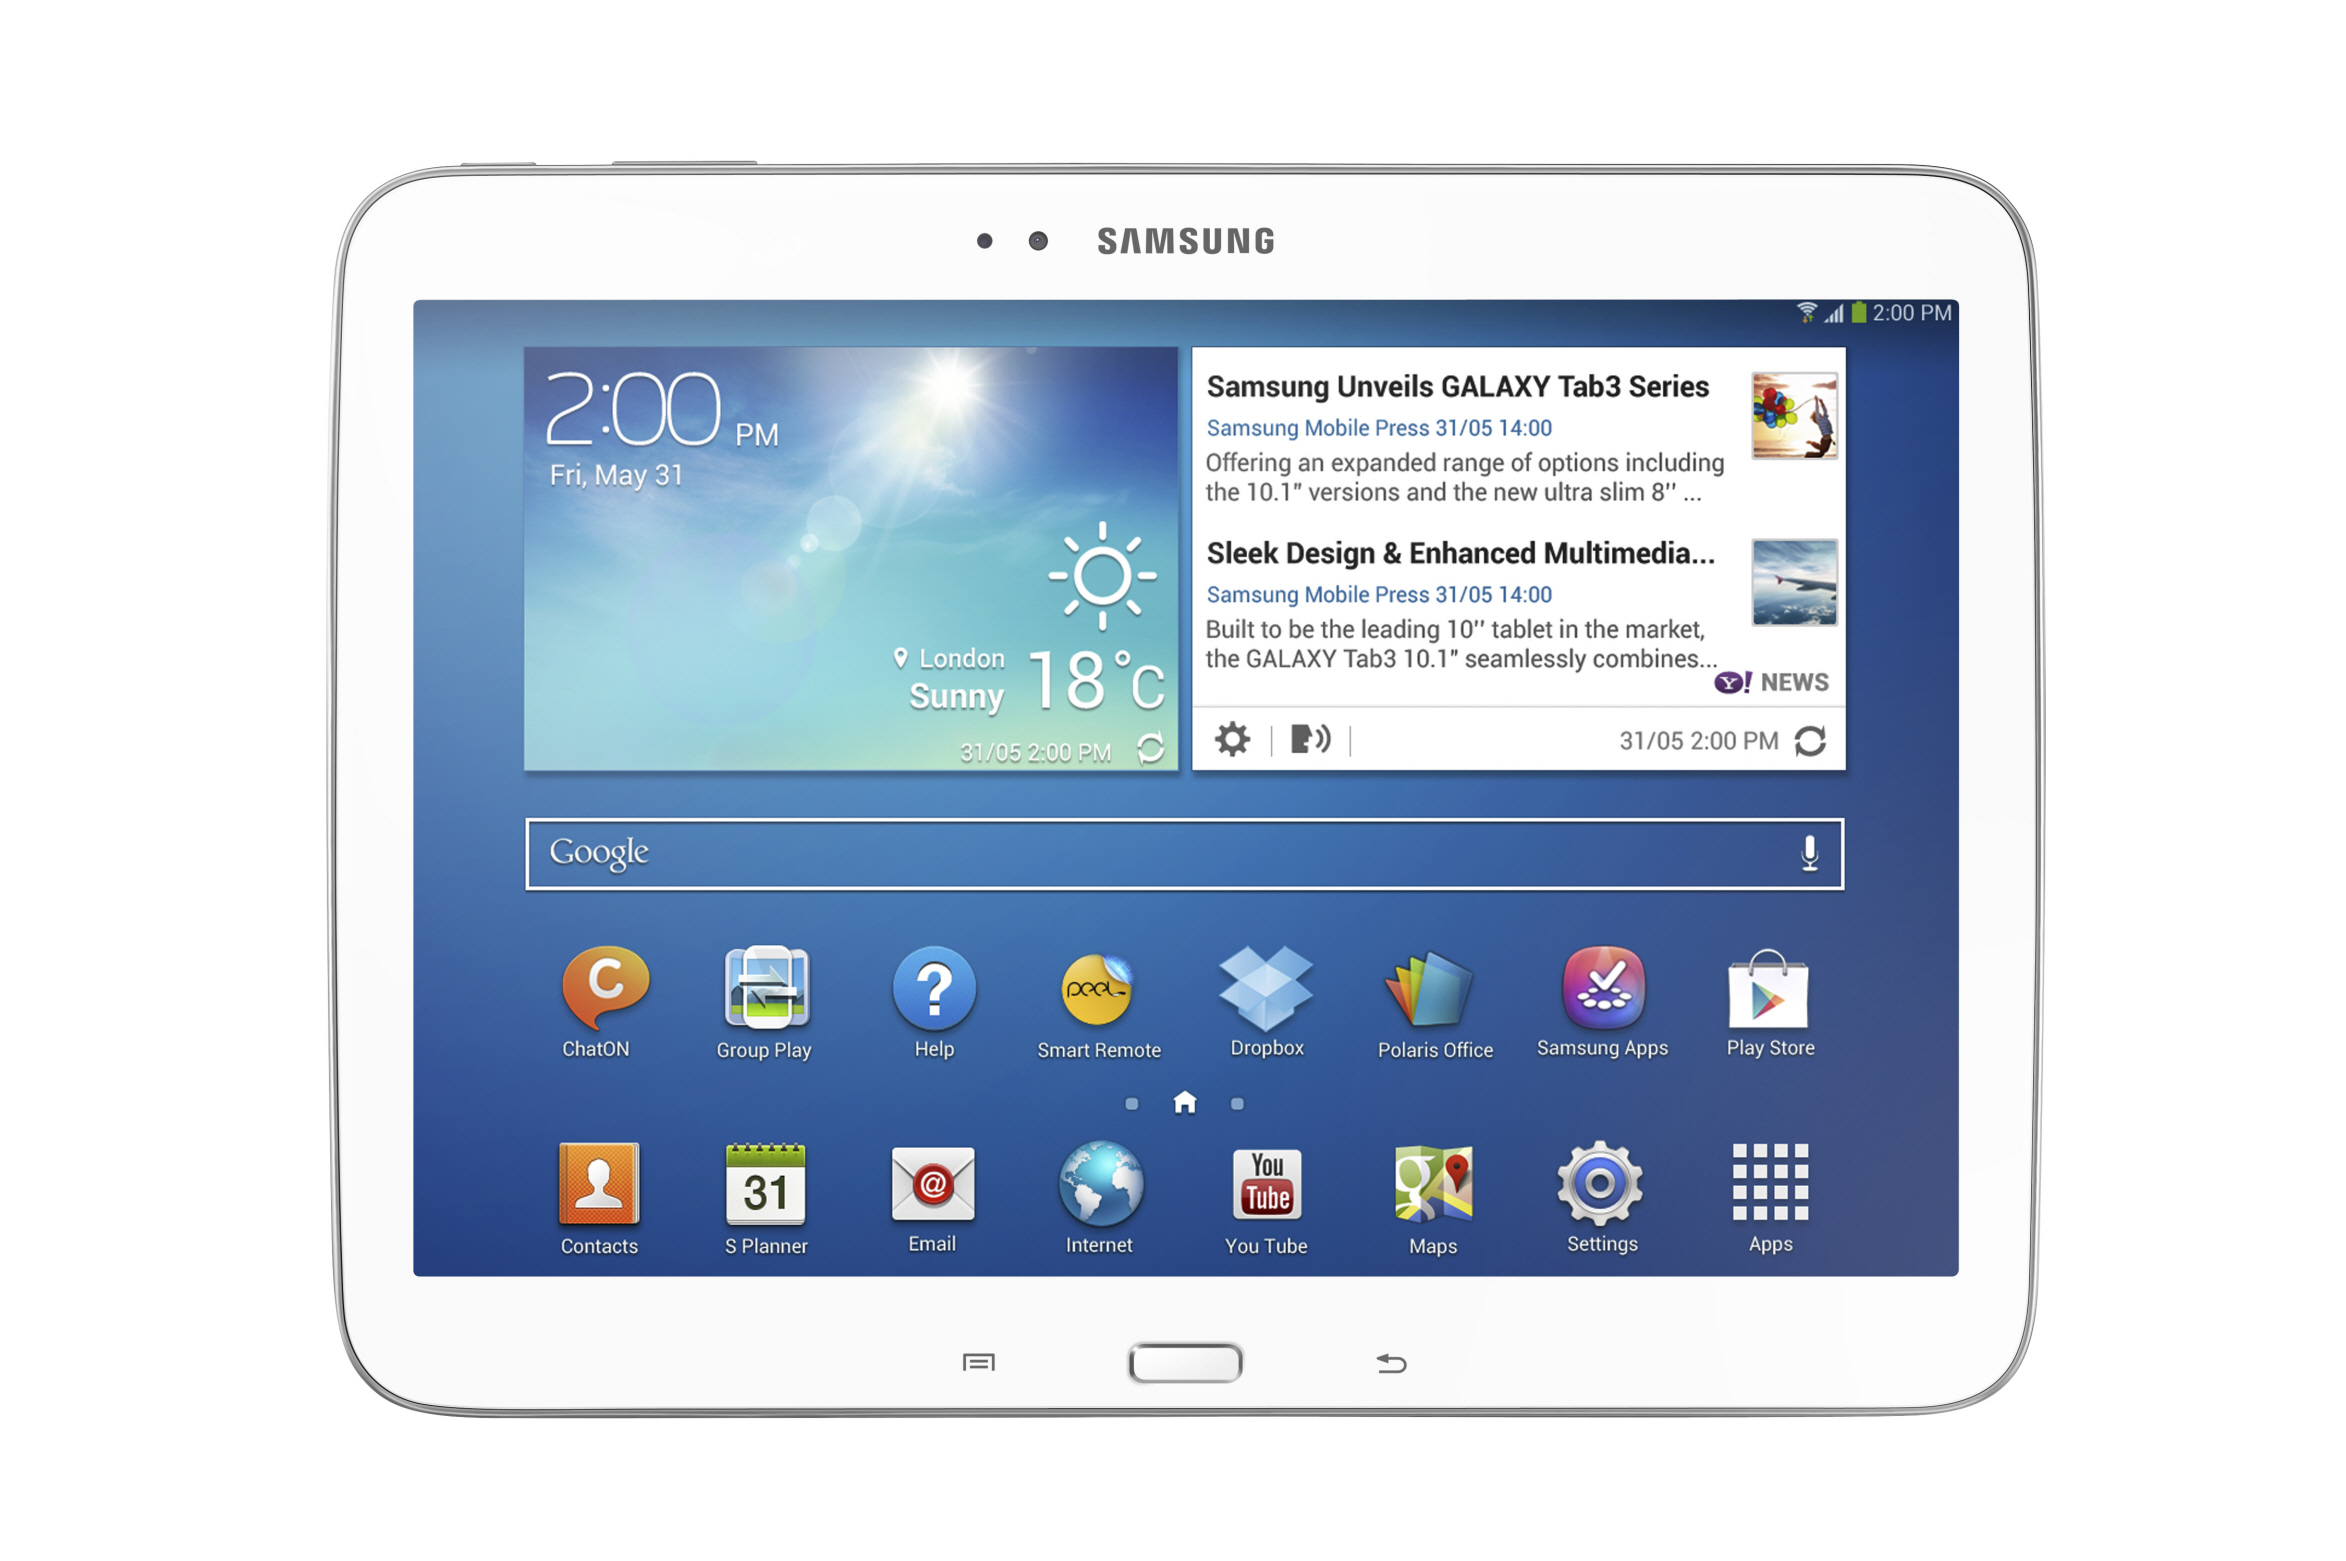 Samsung Introduces a New Line of Galaxy Tab 3 Tablets, Including 8- and 10.1-Inch Flavors